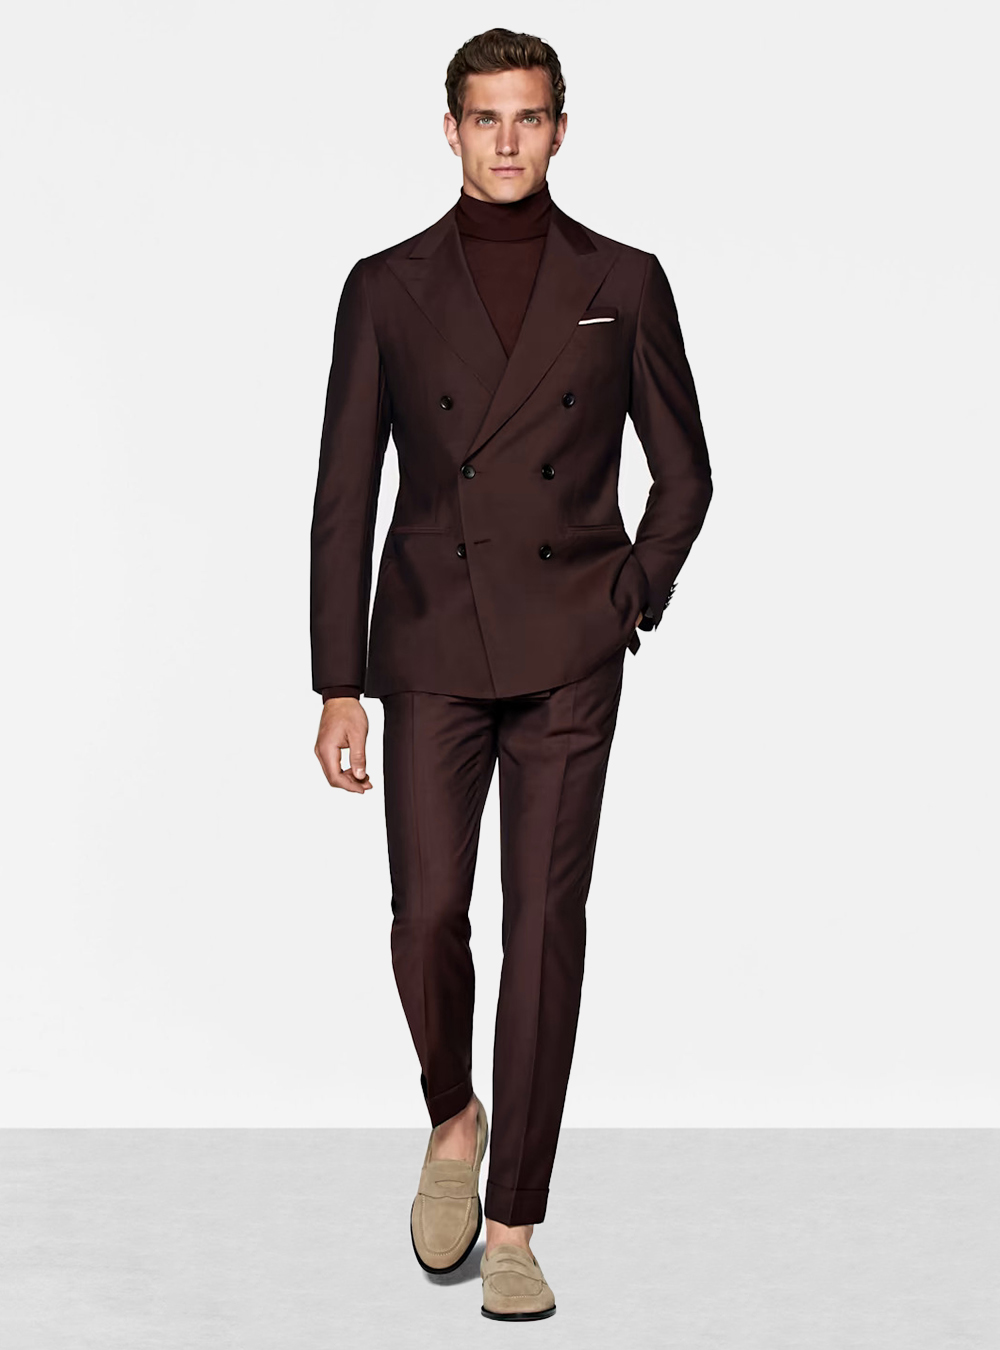 burgundy suit, burgundy turtleneck, and tan suede loafers